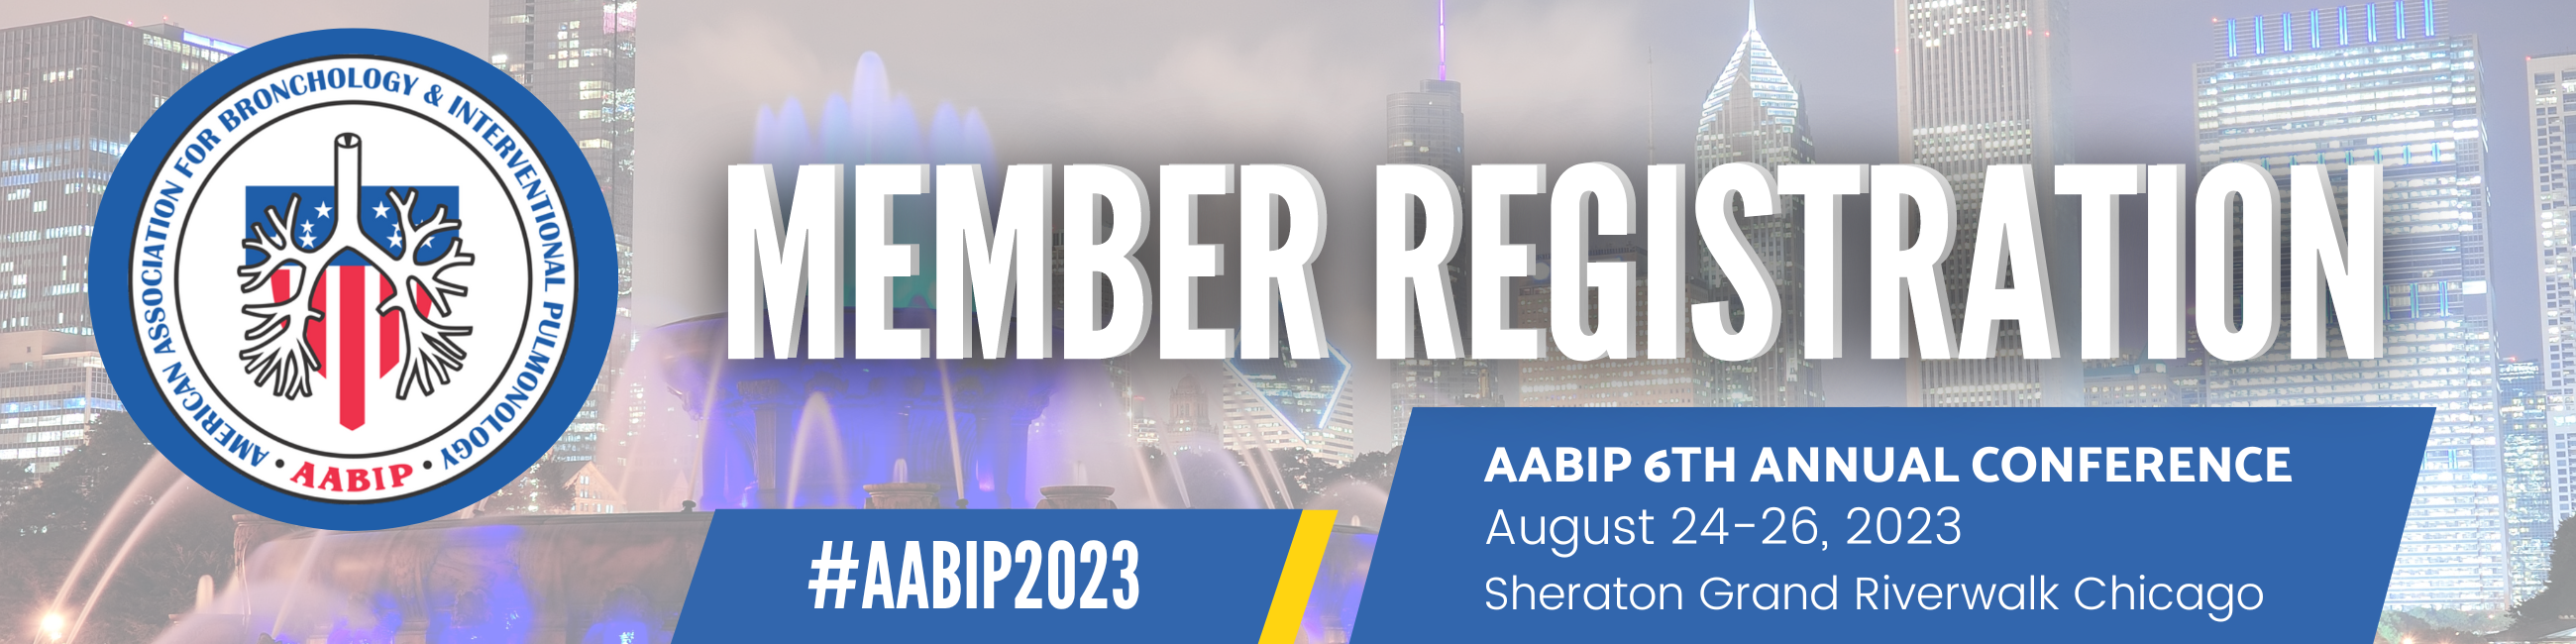 2023 AABIP Annual Conference Member Registration